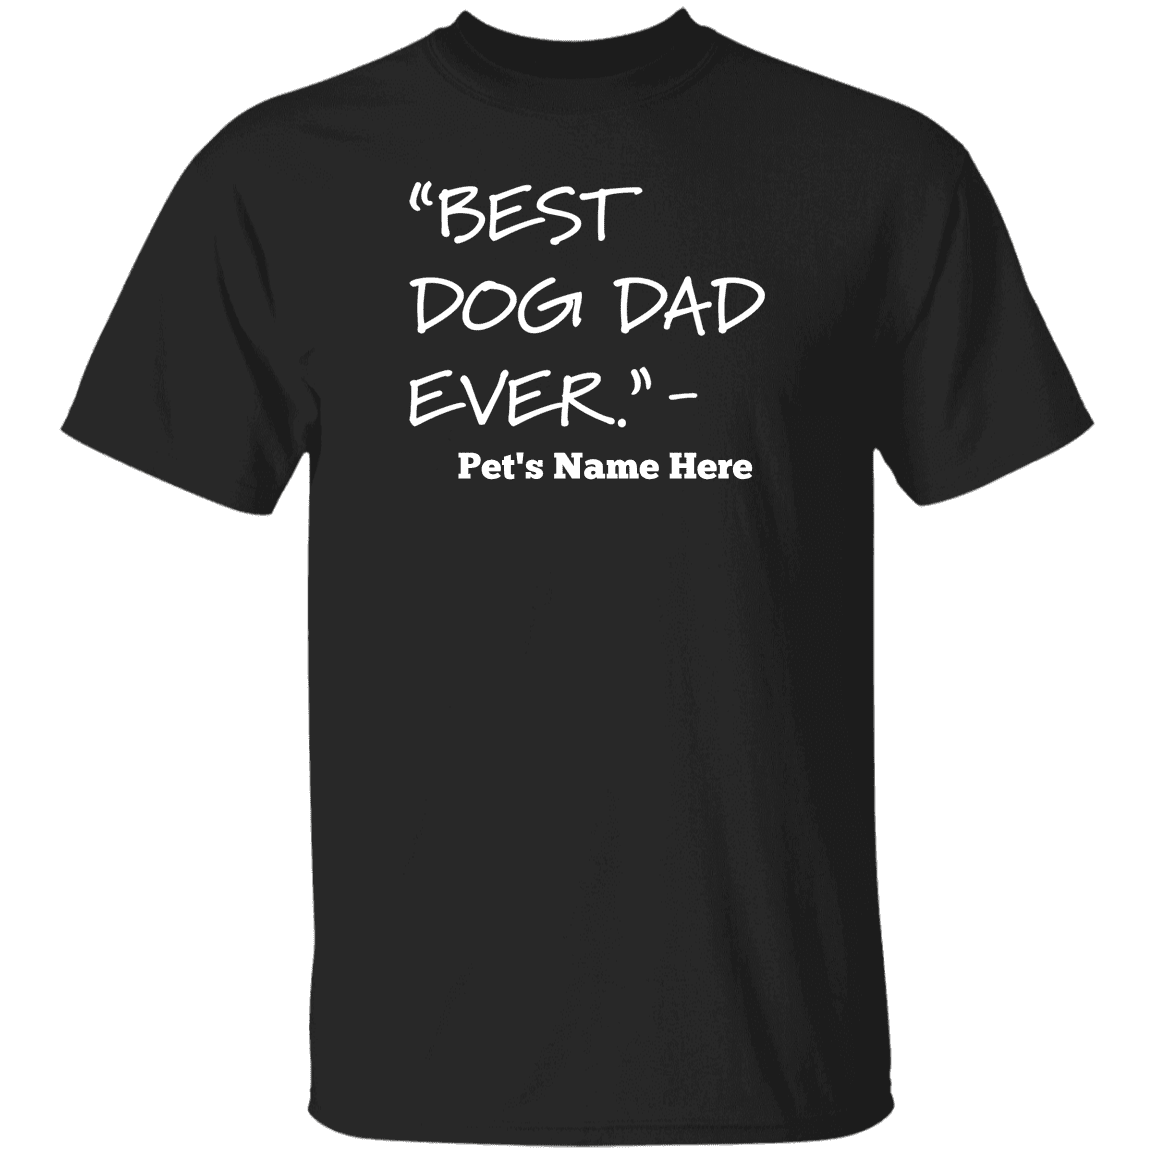 Personalized Best Dog Dad Ever - T Shirt.